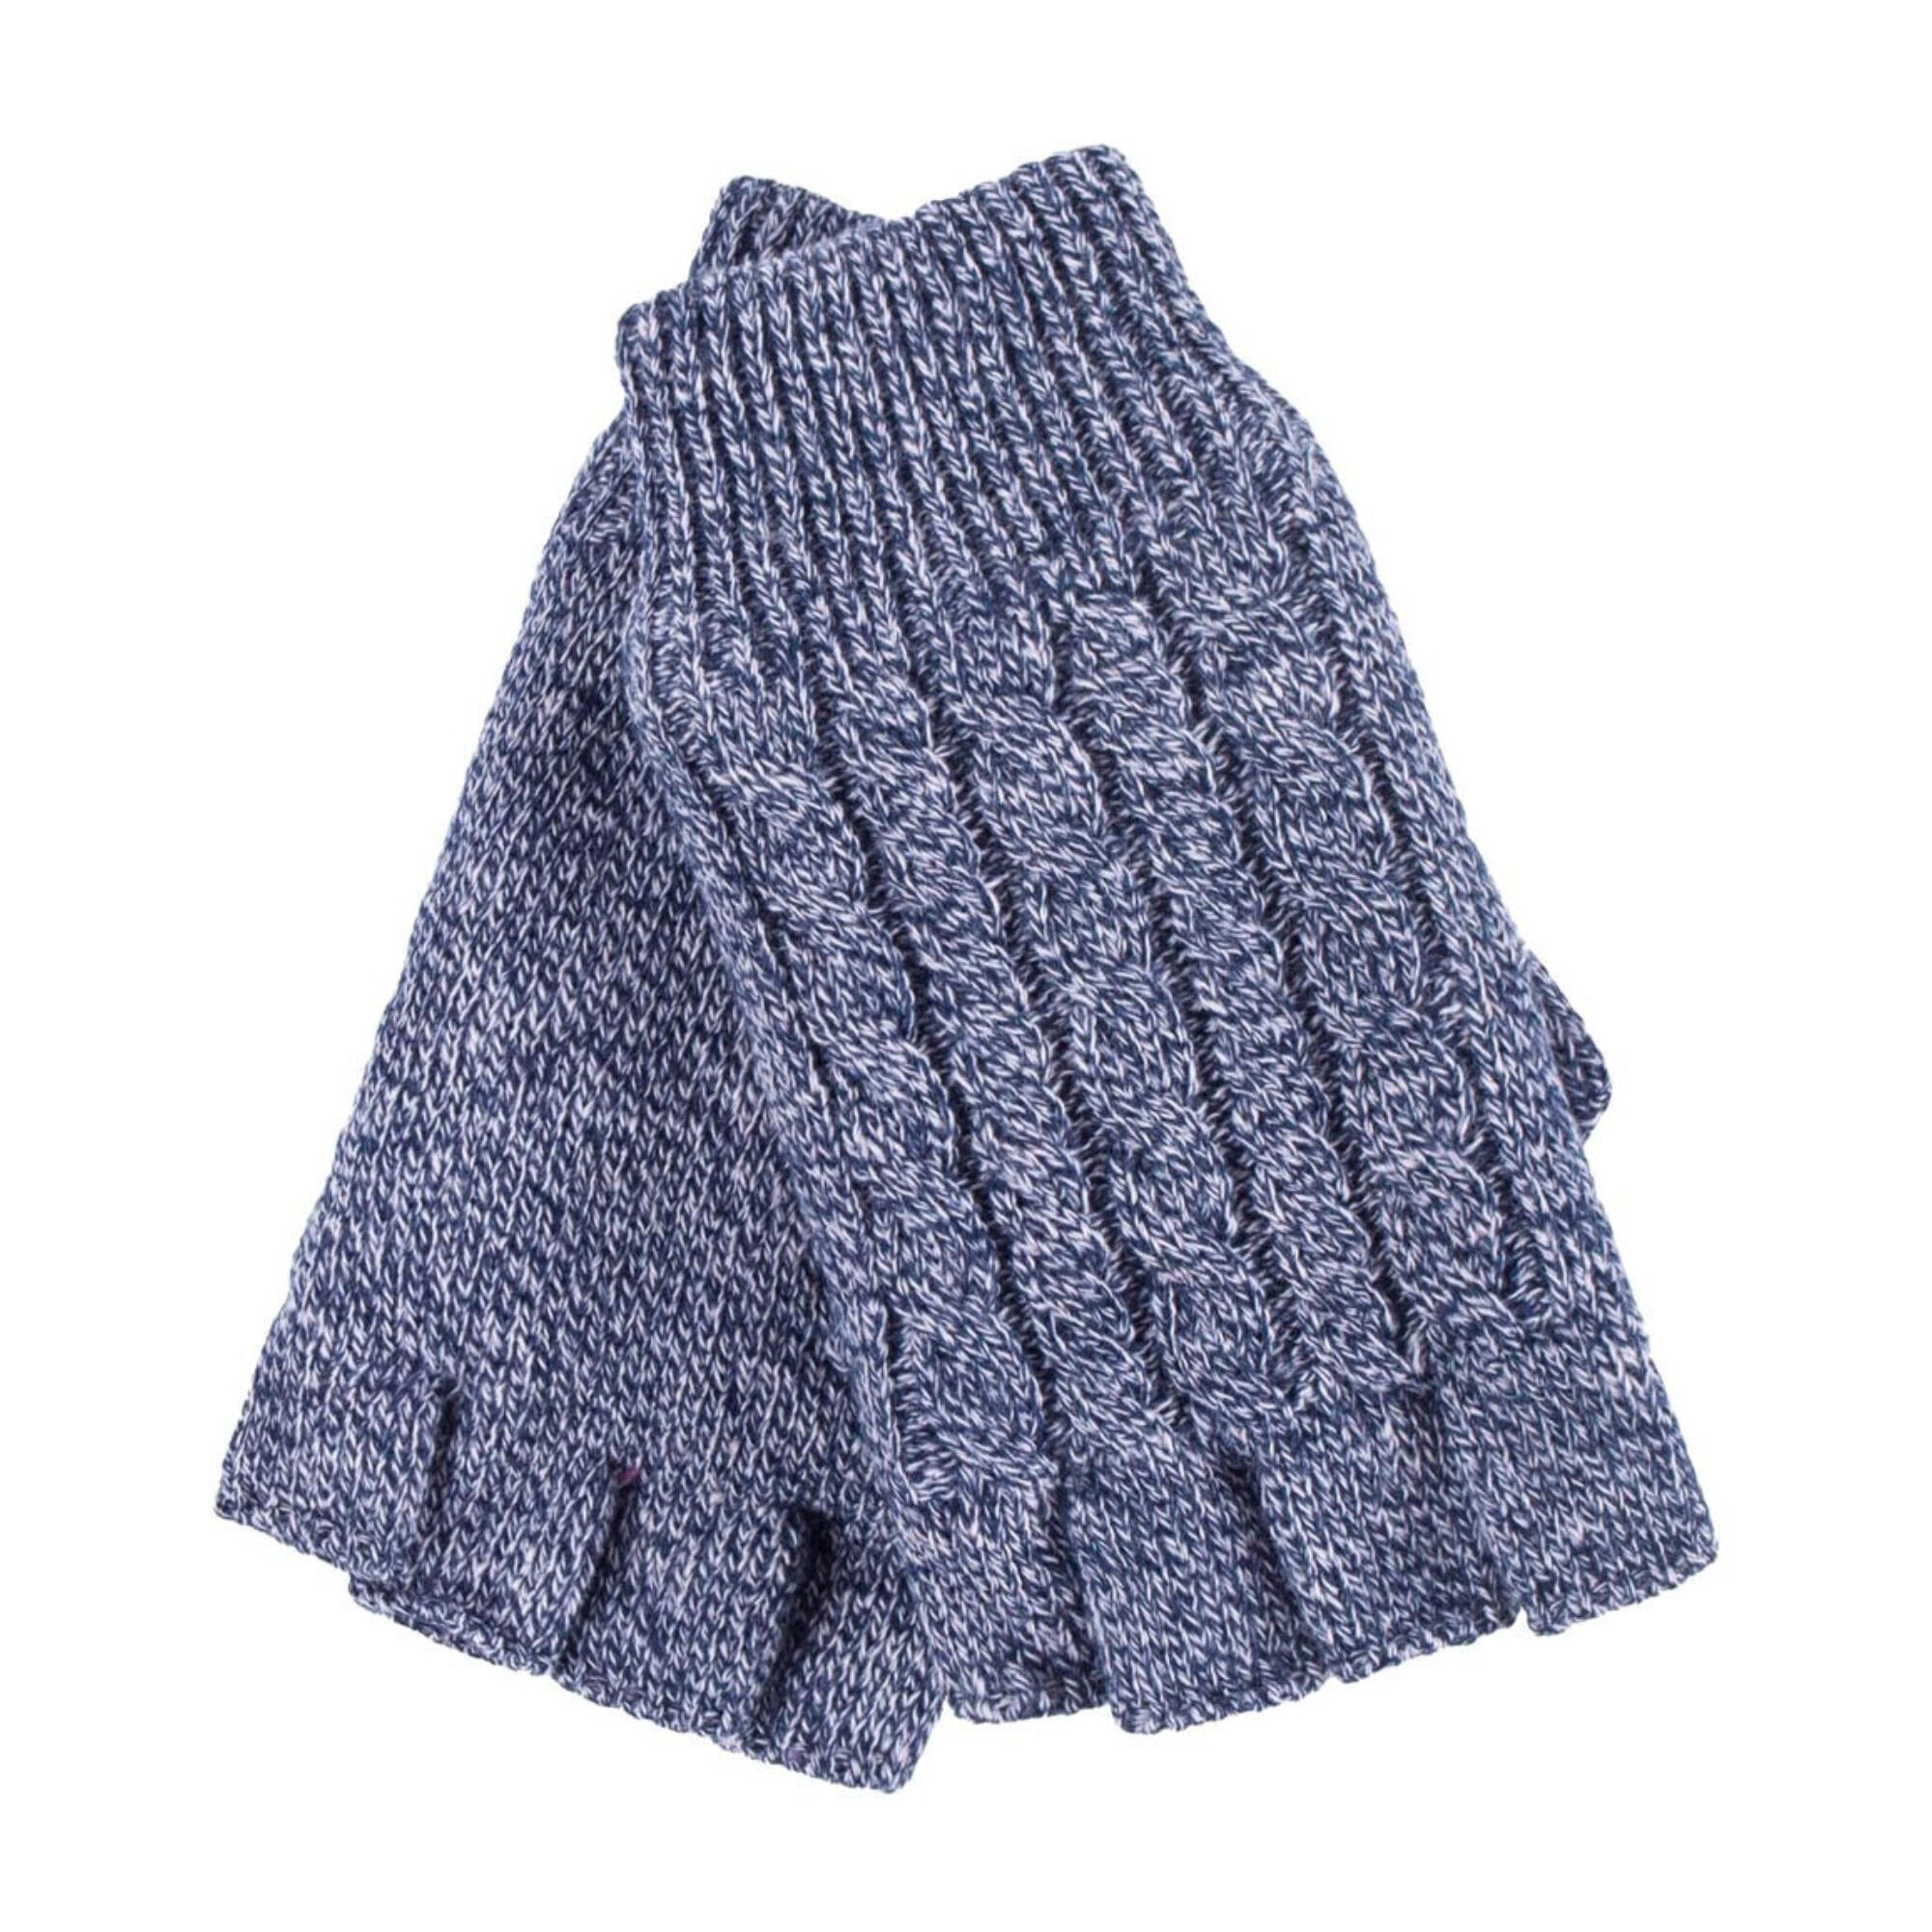 HEAT HOLDERS Ladies Cable Knitted Winter Thermal Fingerless Gloves